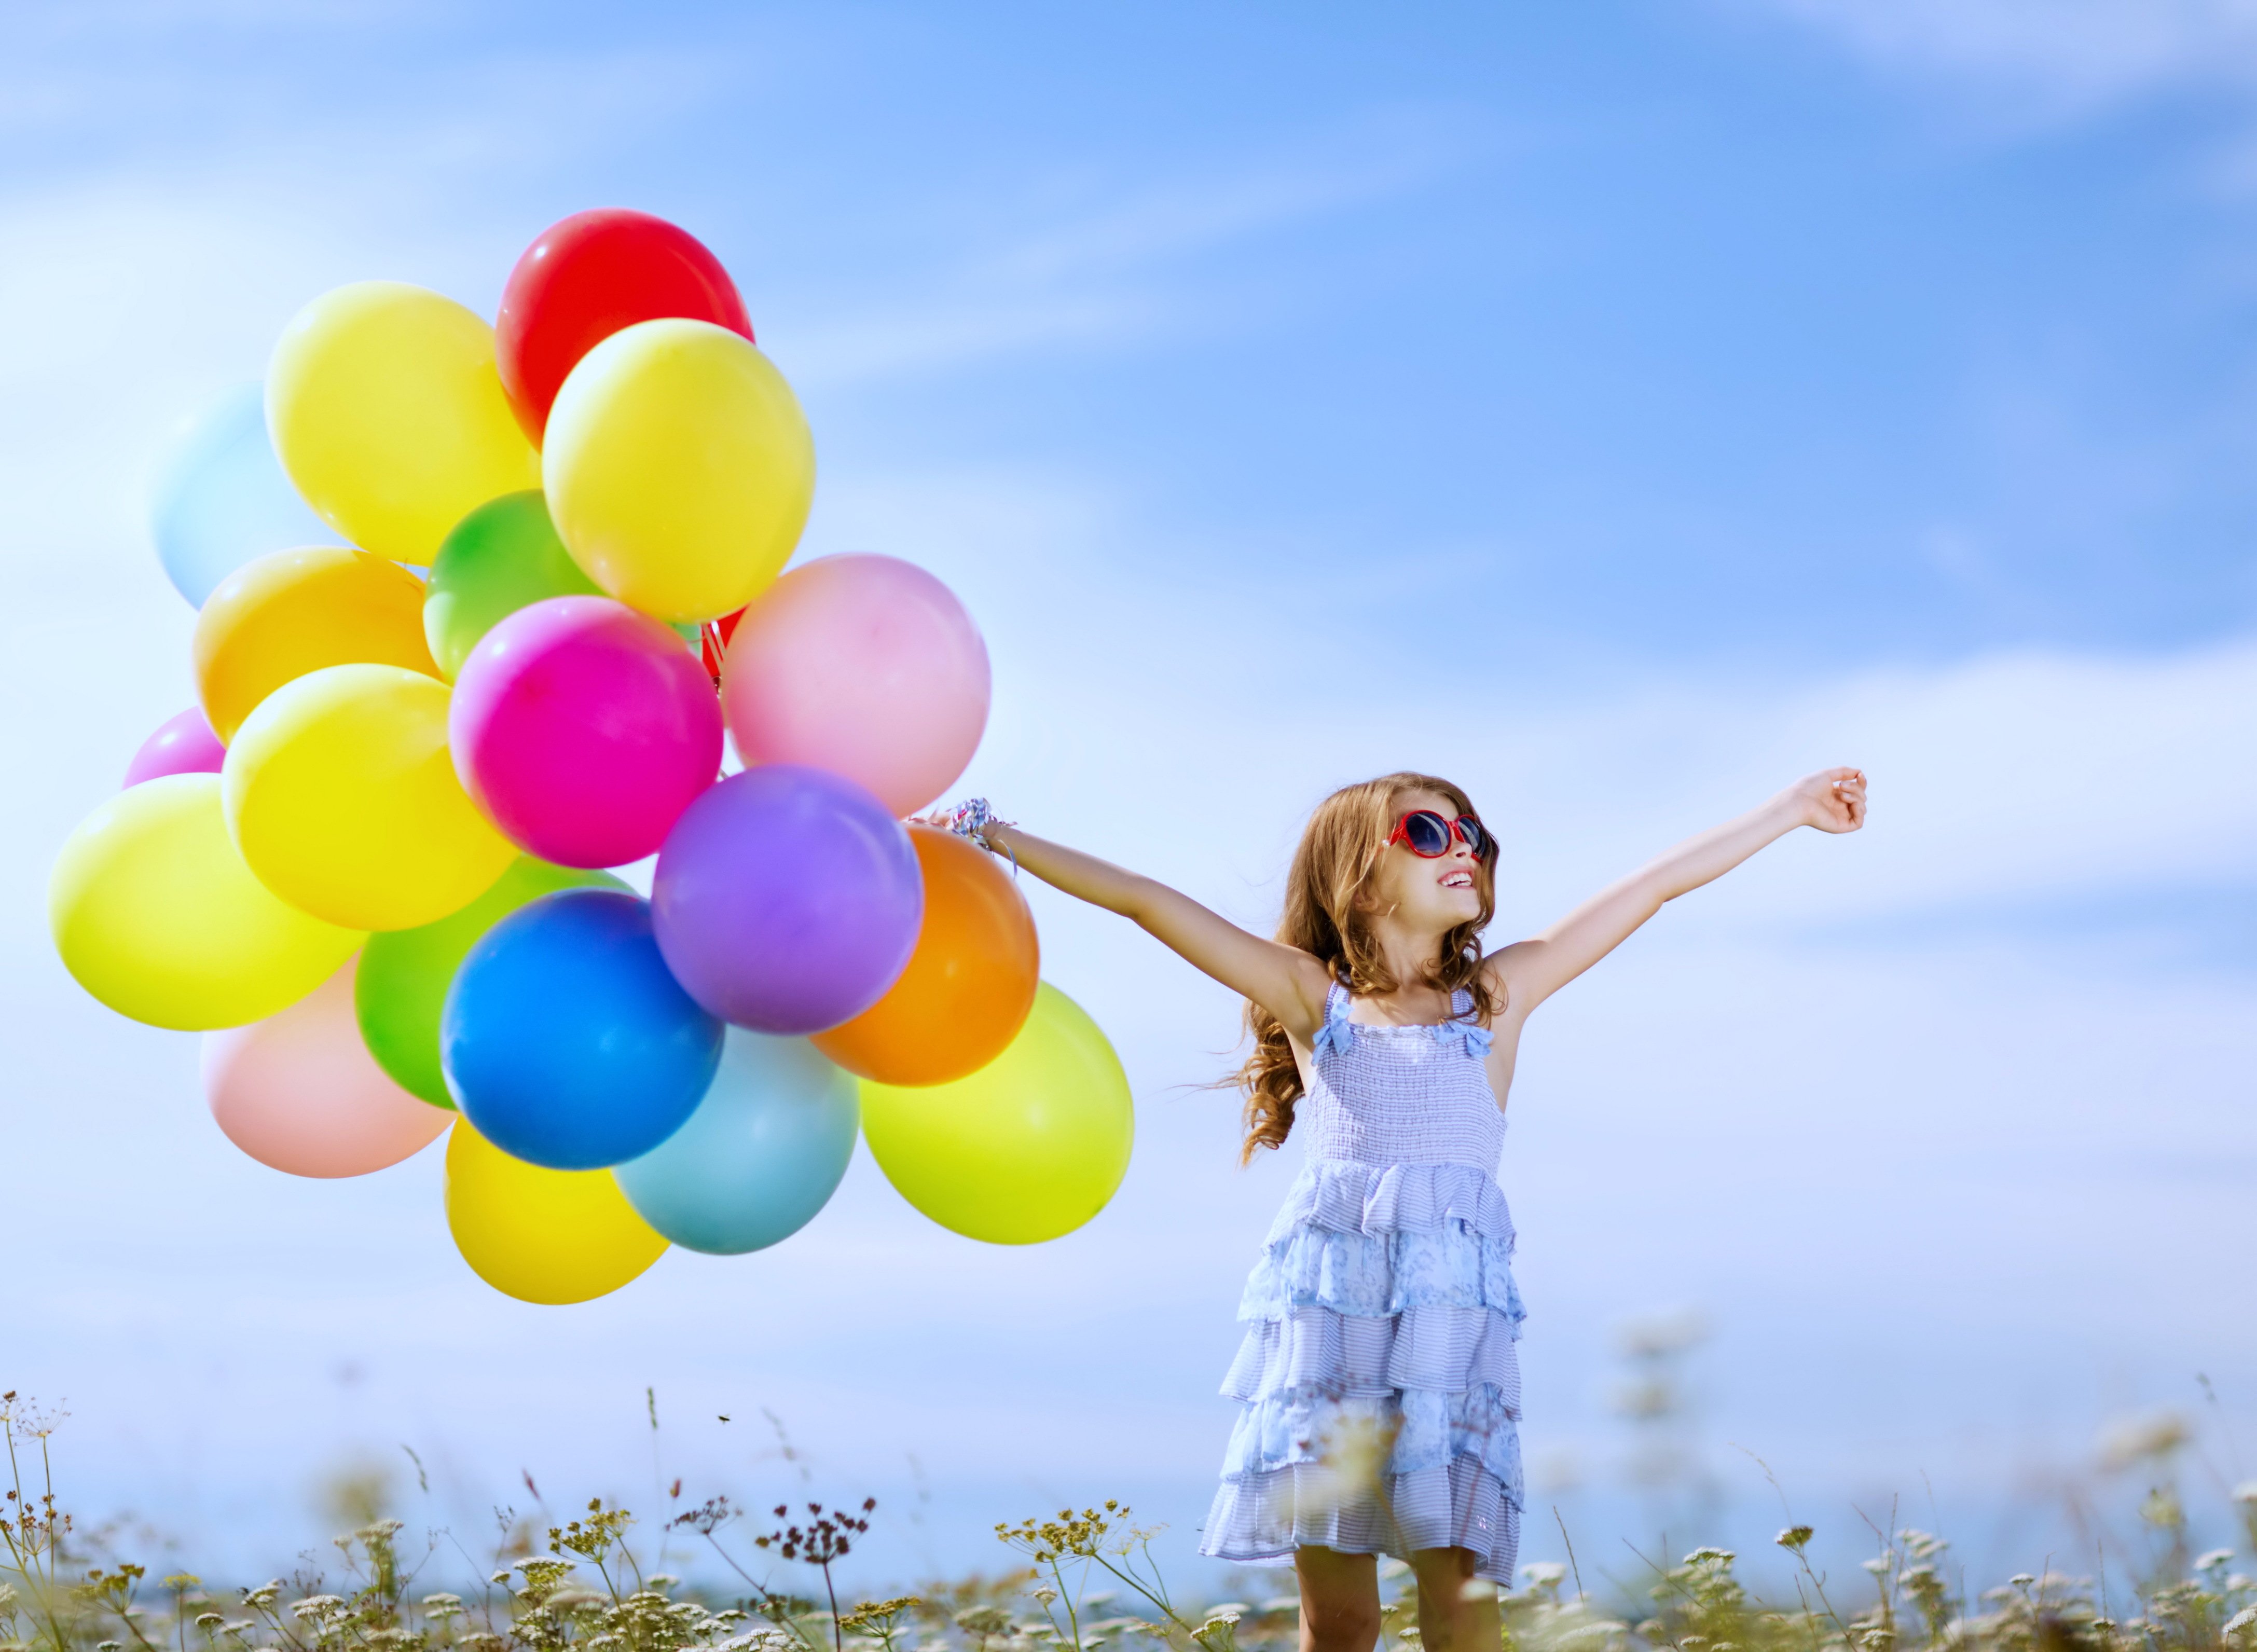 kids, Children, Childhood, Games, Playing, Joy, Fun, Happy, Life, Nature, Landscapes, Earth, Little, Colors, Sky, Sunny, Spring, Balloon Wallpaper